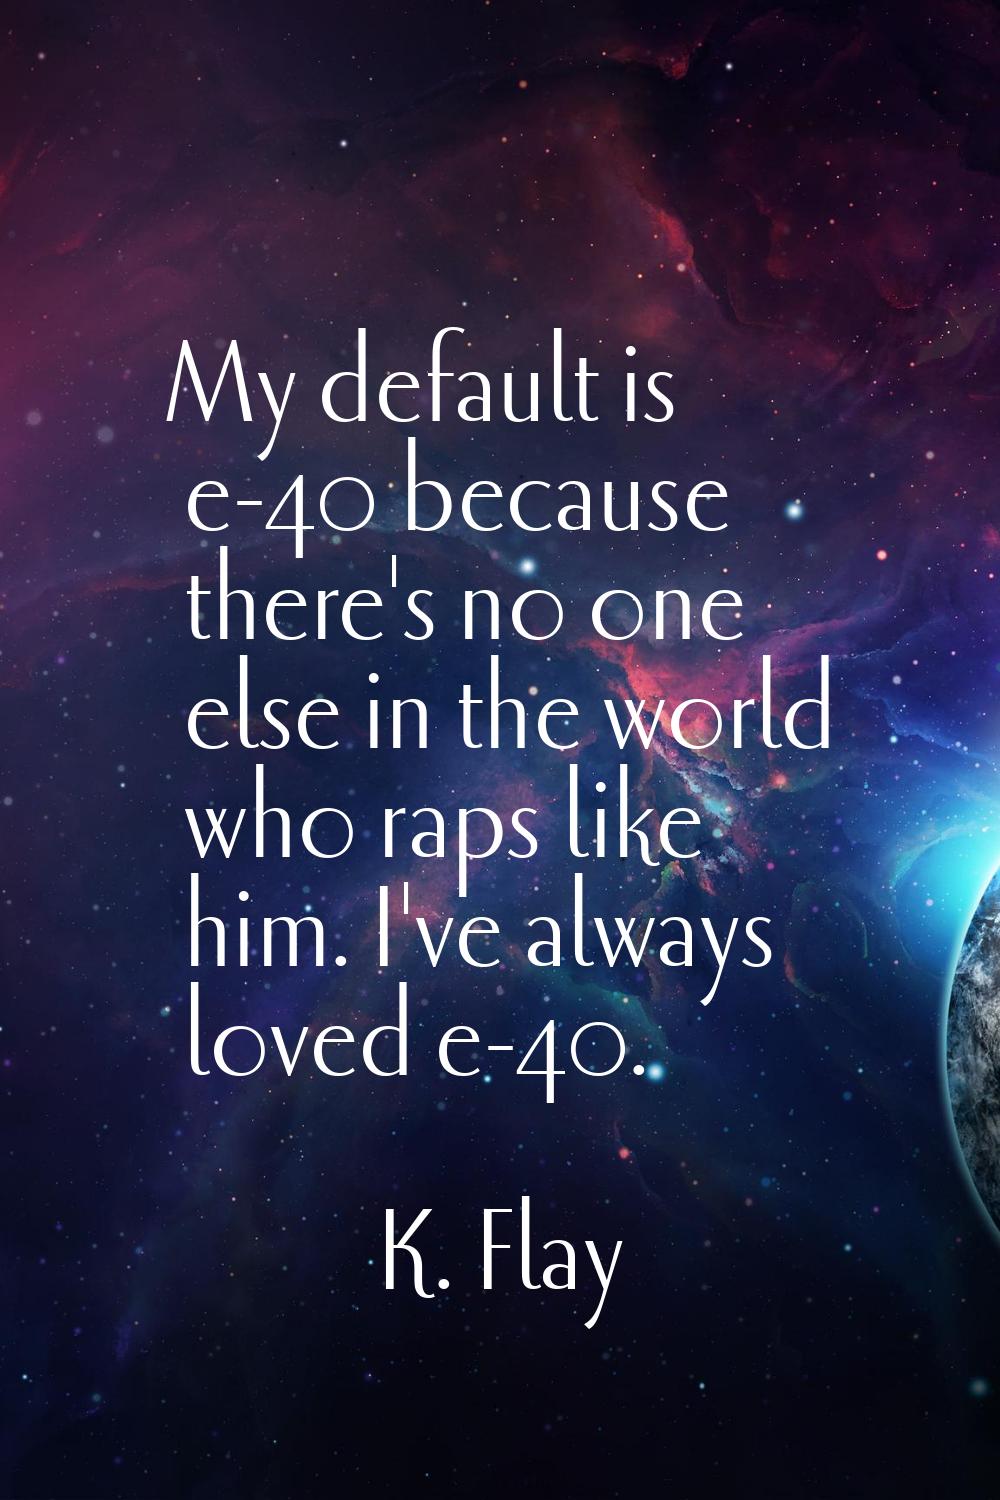 My default is e-40 because there's no one else in the world who raps like him. I've always loved e-